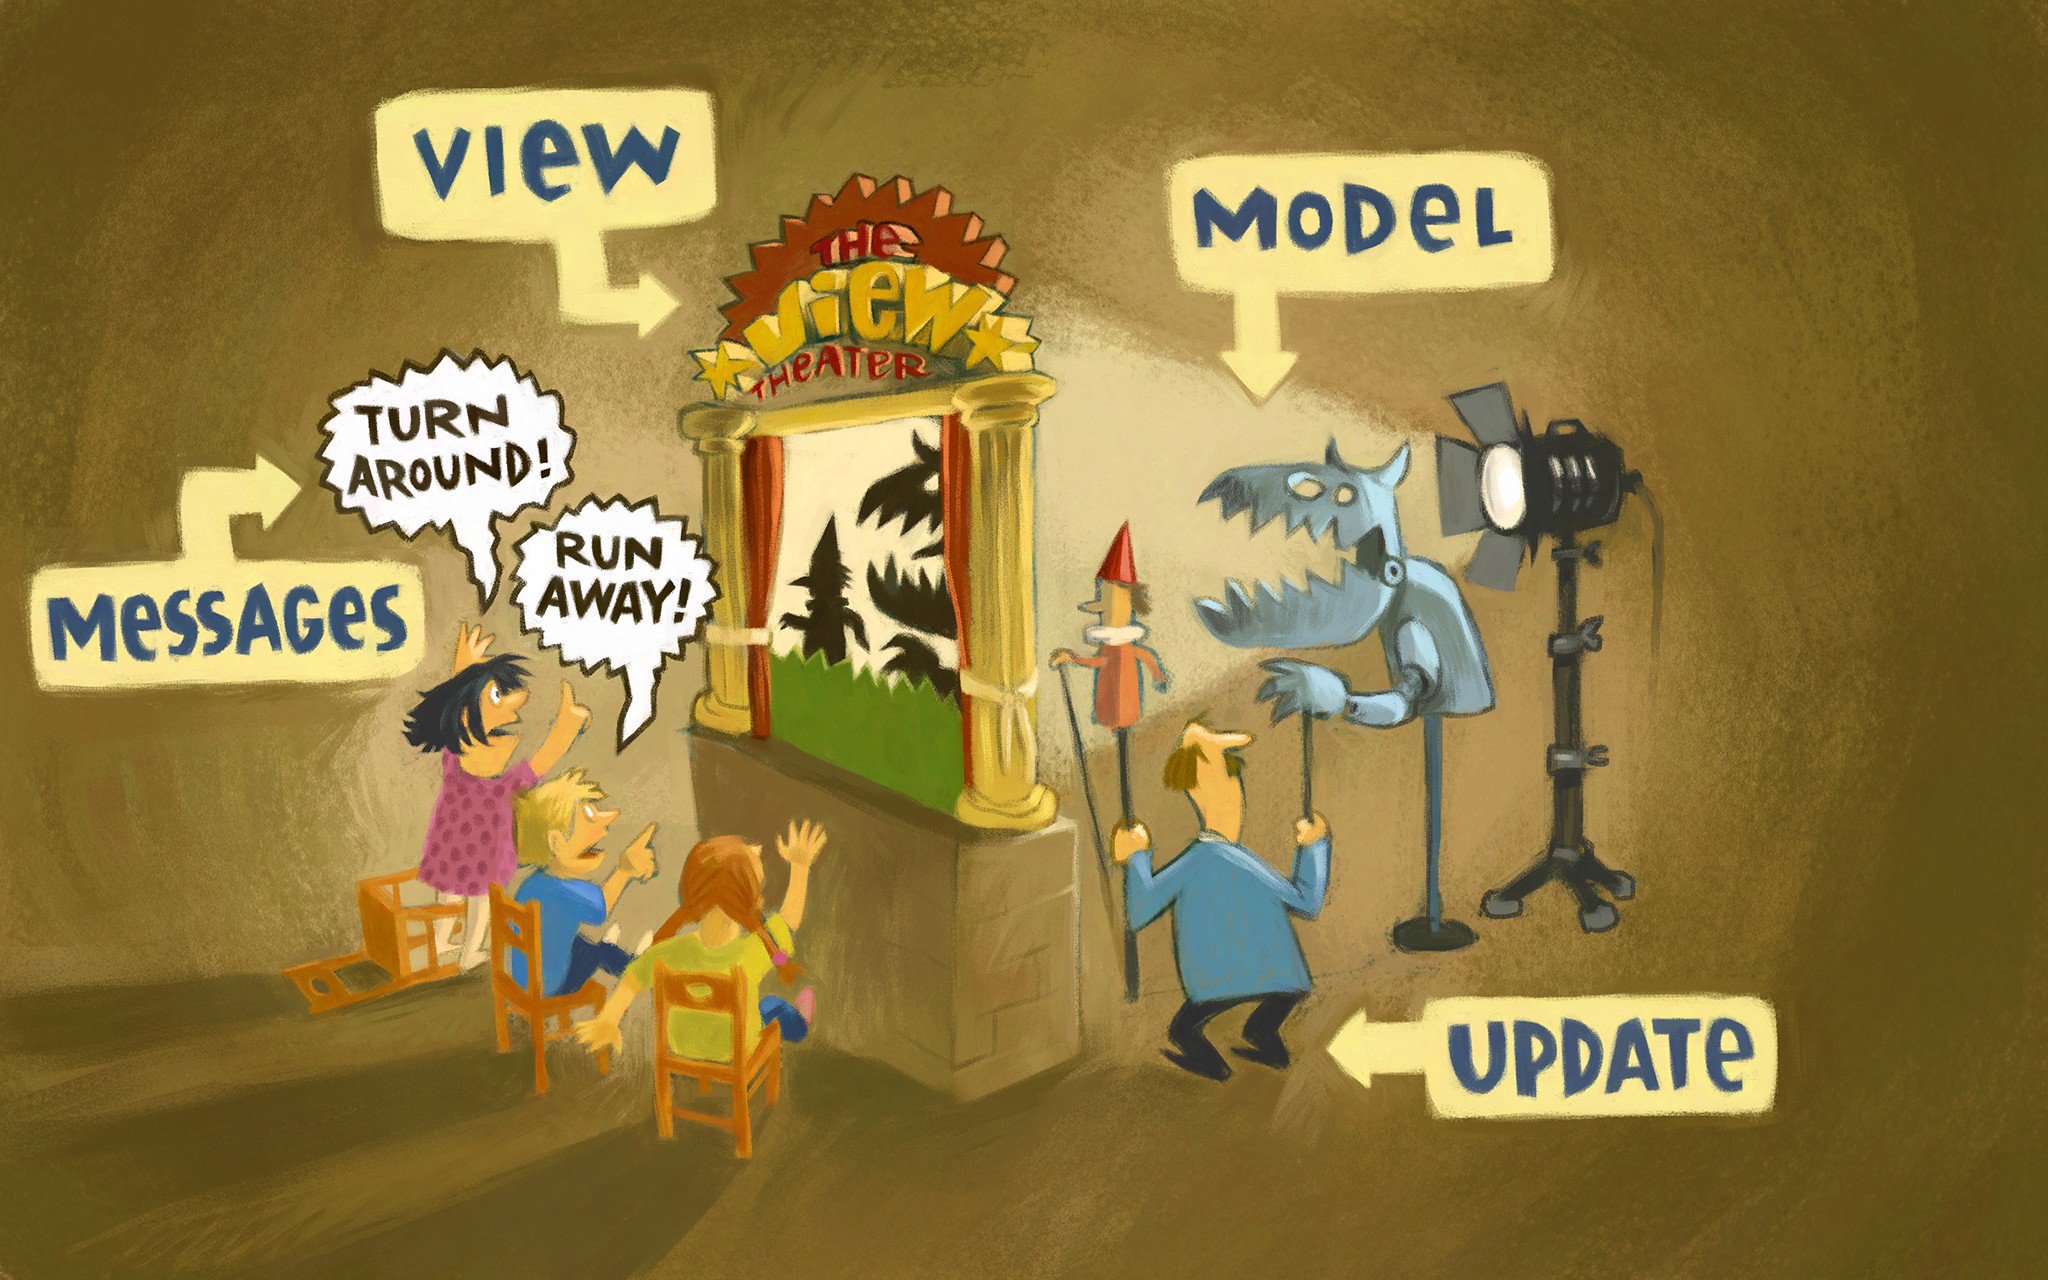 "Model View Update - The Elm Architecture"